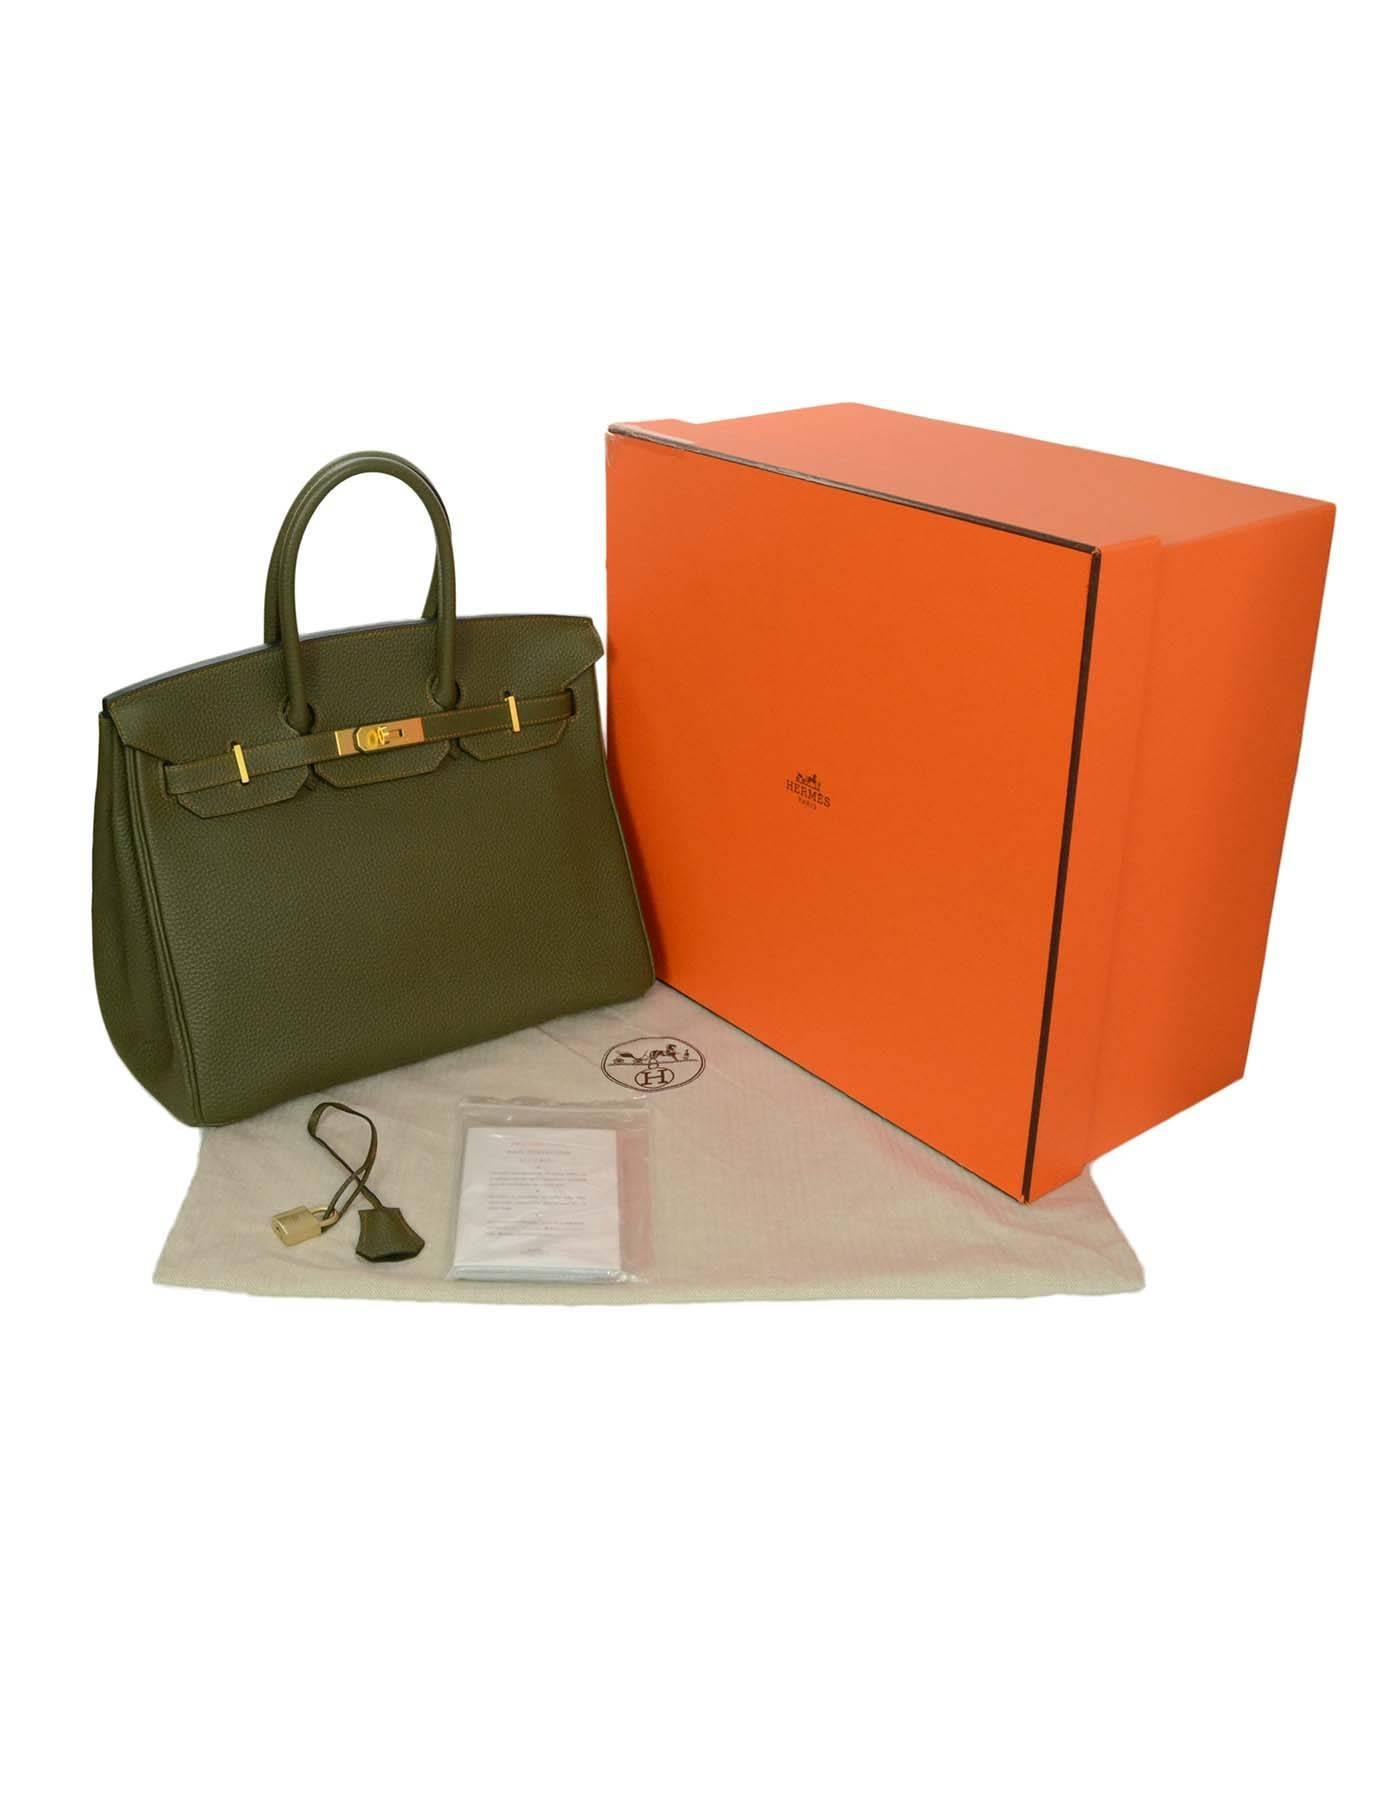 Hermes Olive Green Togo Special Order 35cm Birkin Bag ﻿
Features a horse shoe stamp, signifying that it is a special order. Has brushed gold hardware, and contrasting orange stitching
Made In: France
Year of Production: 2010
Color: Olive